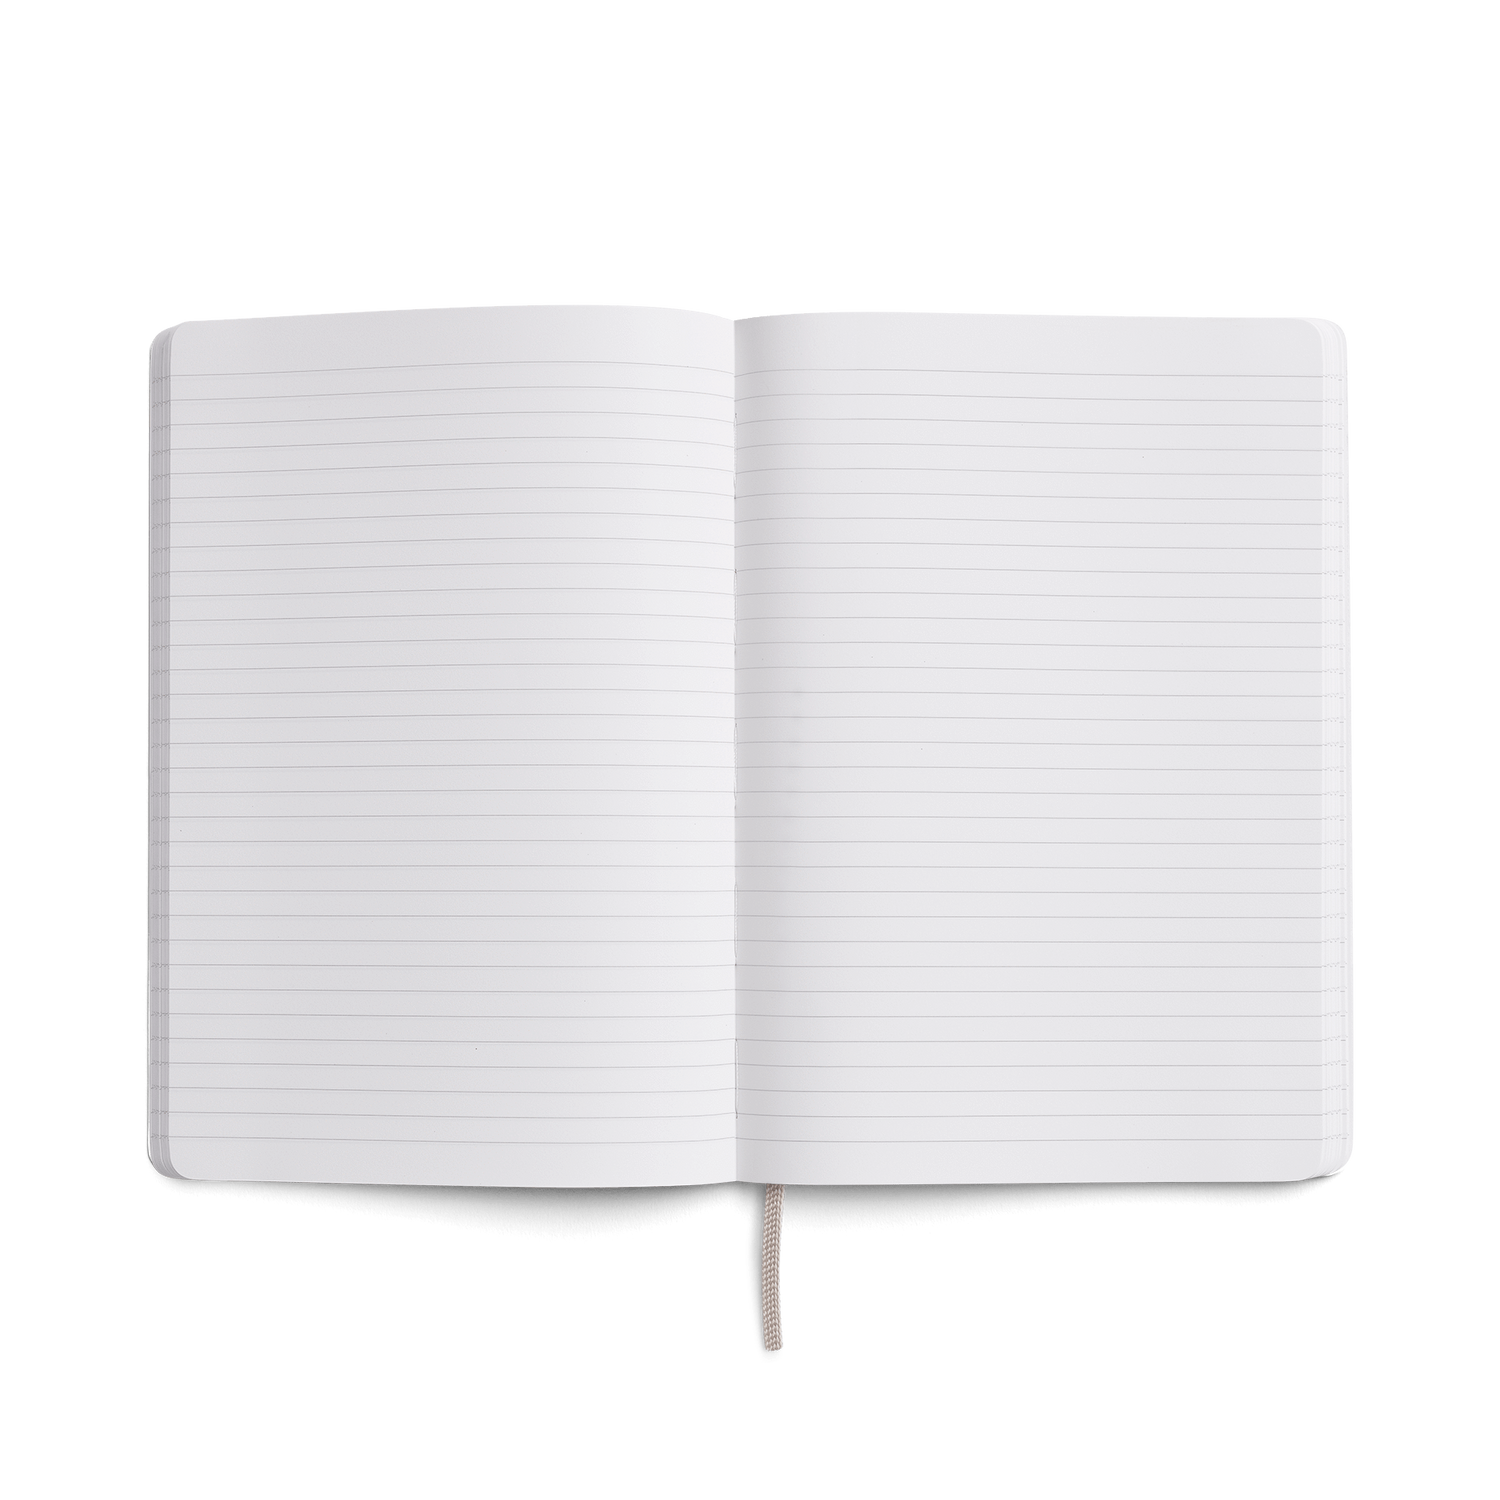 Custom Karst Stone Paper Softcover Notebook, Corporate Gifts